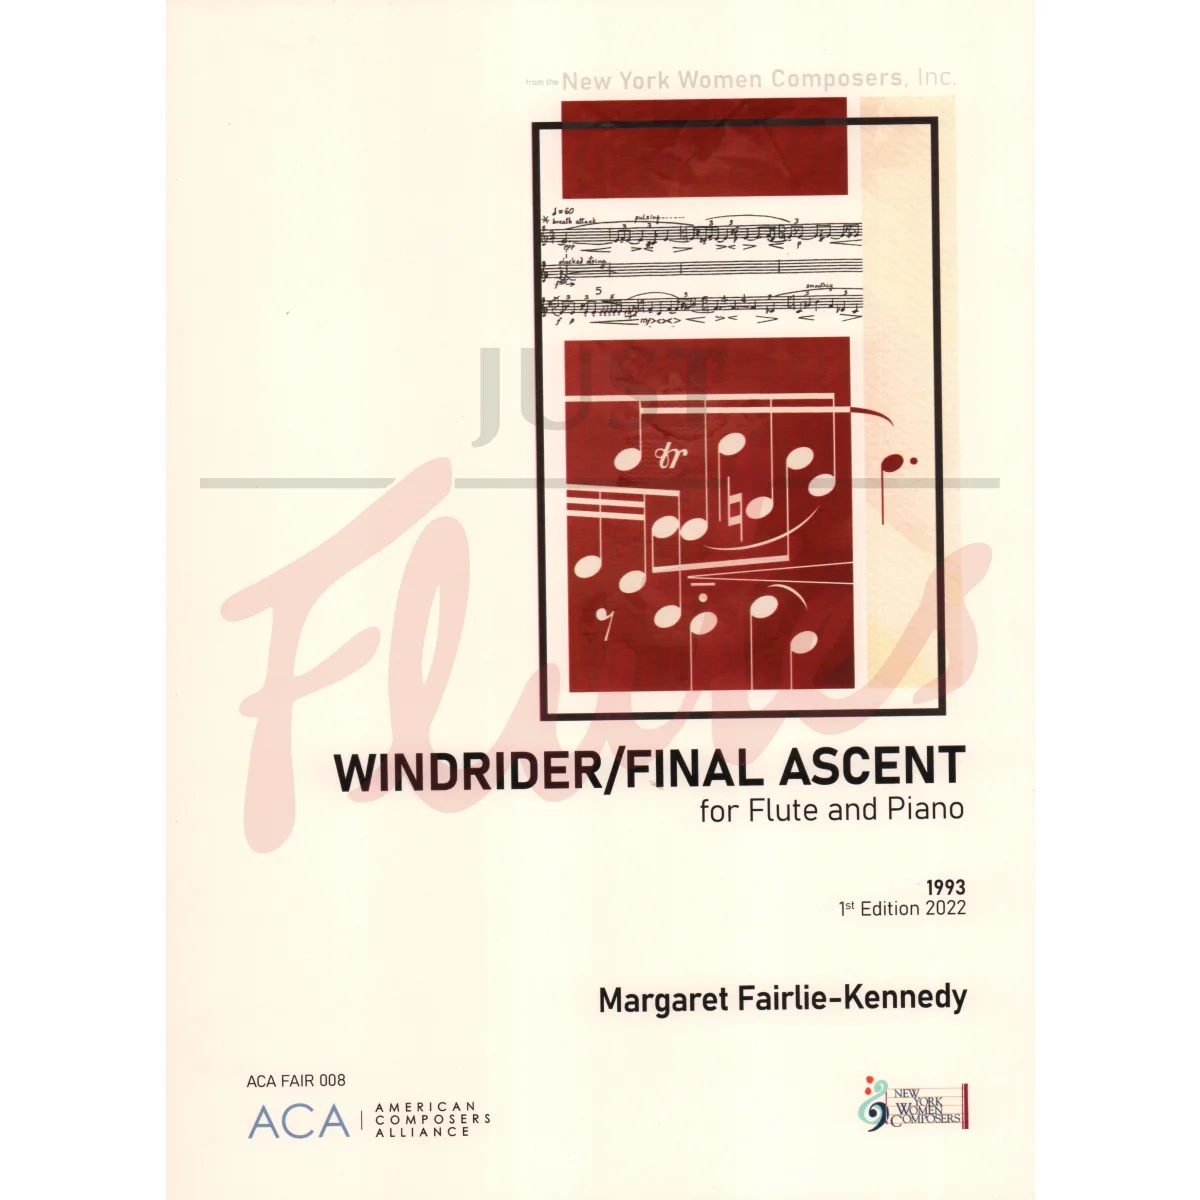 Windrider/Final Ascent for Flute and Piano